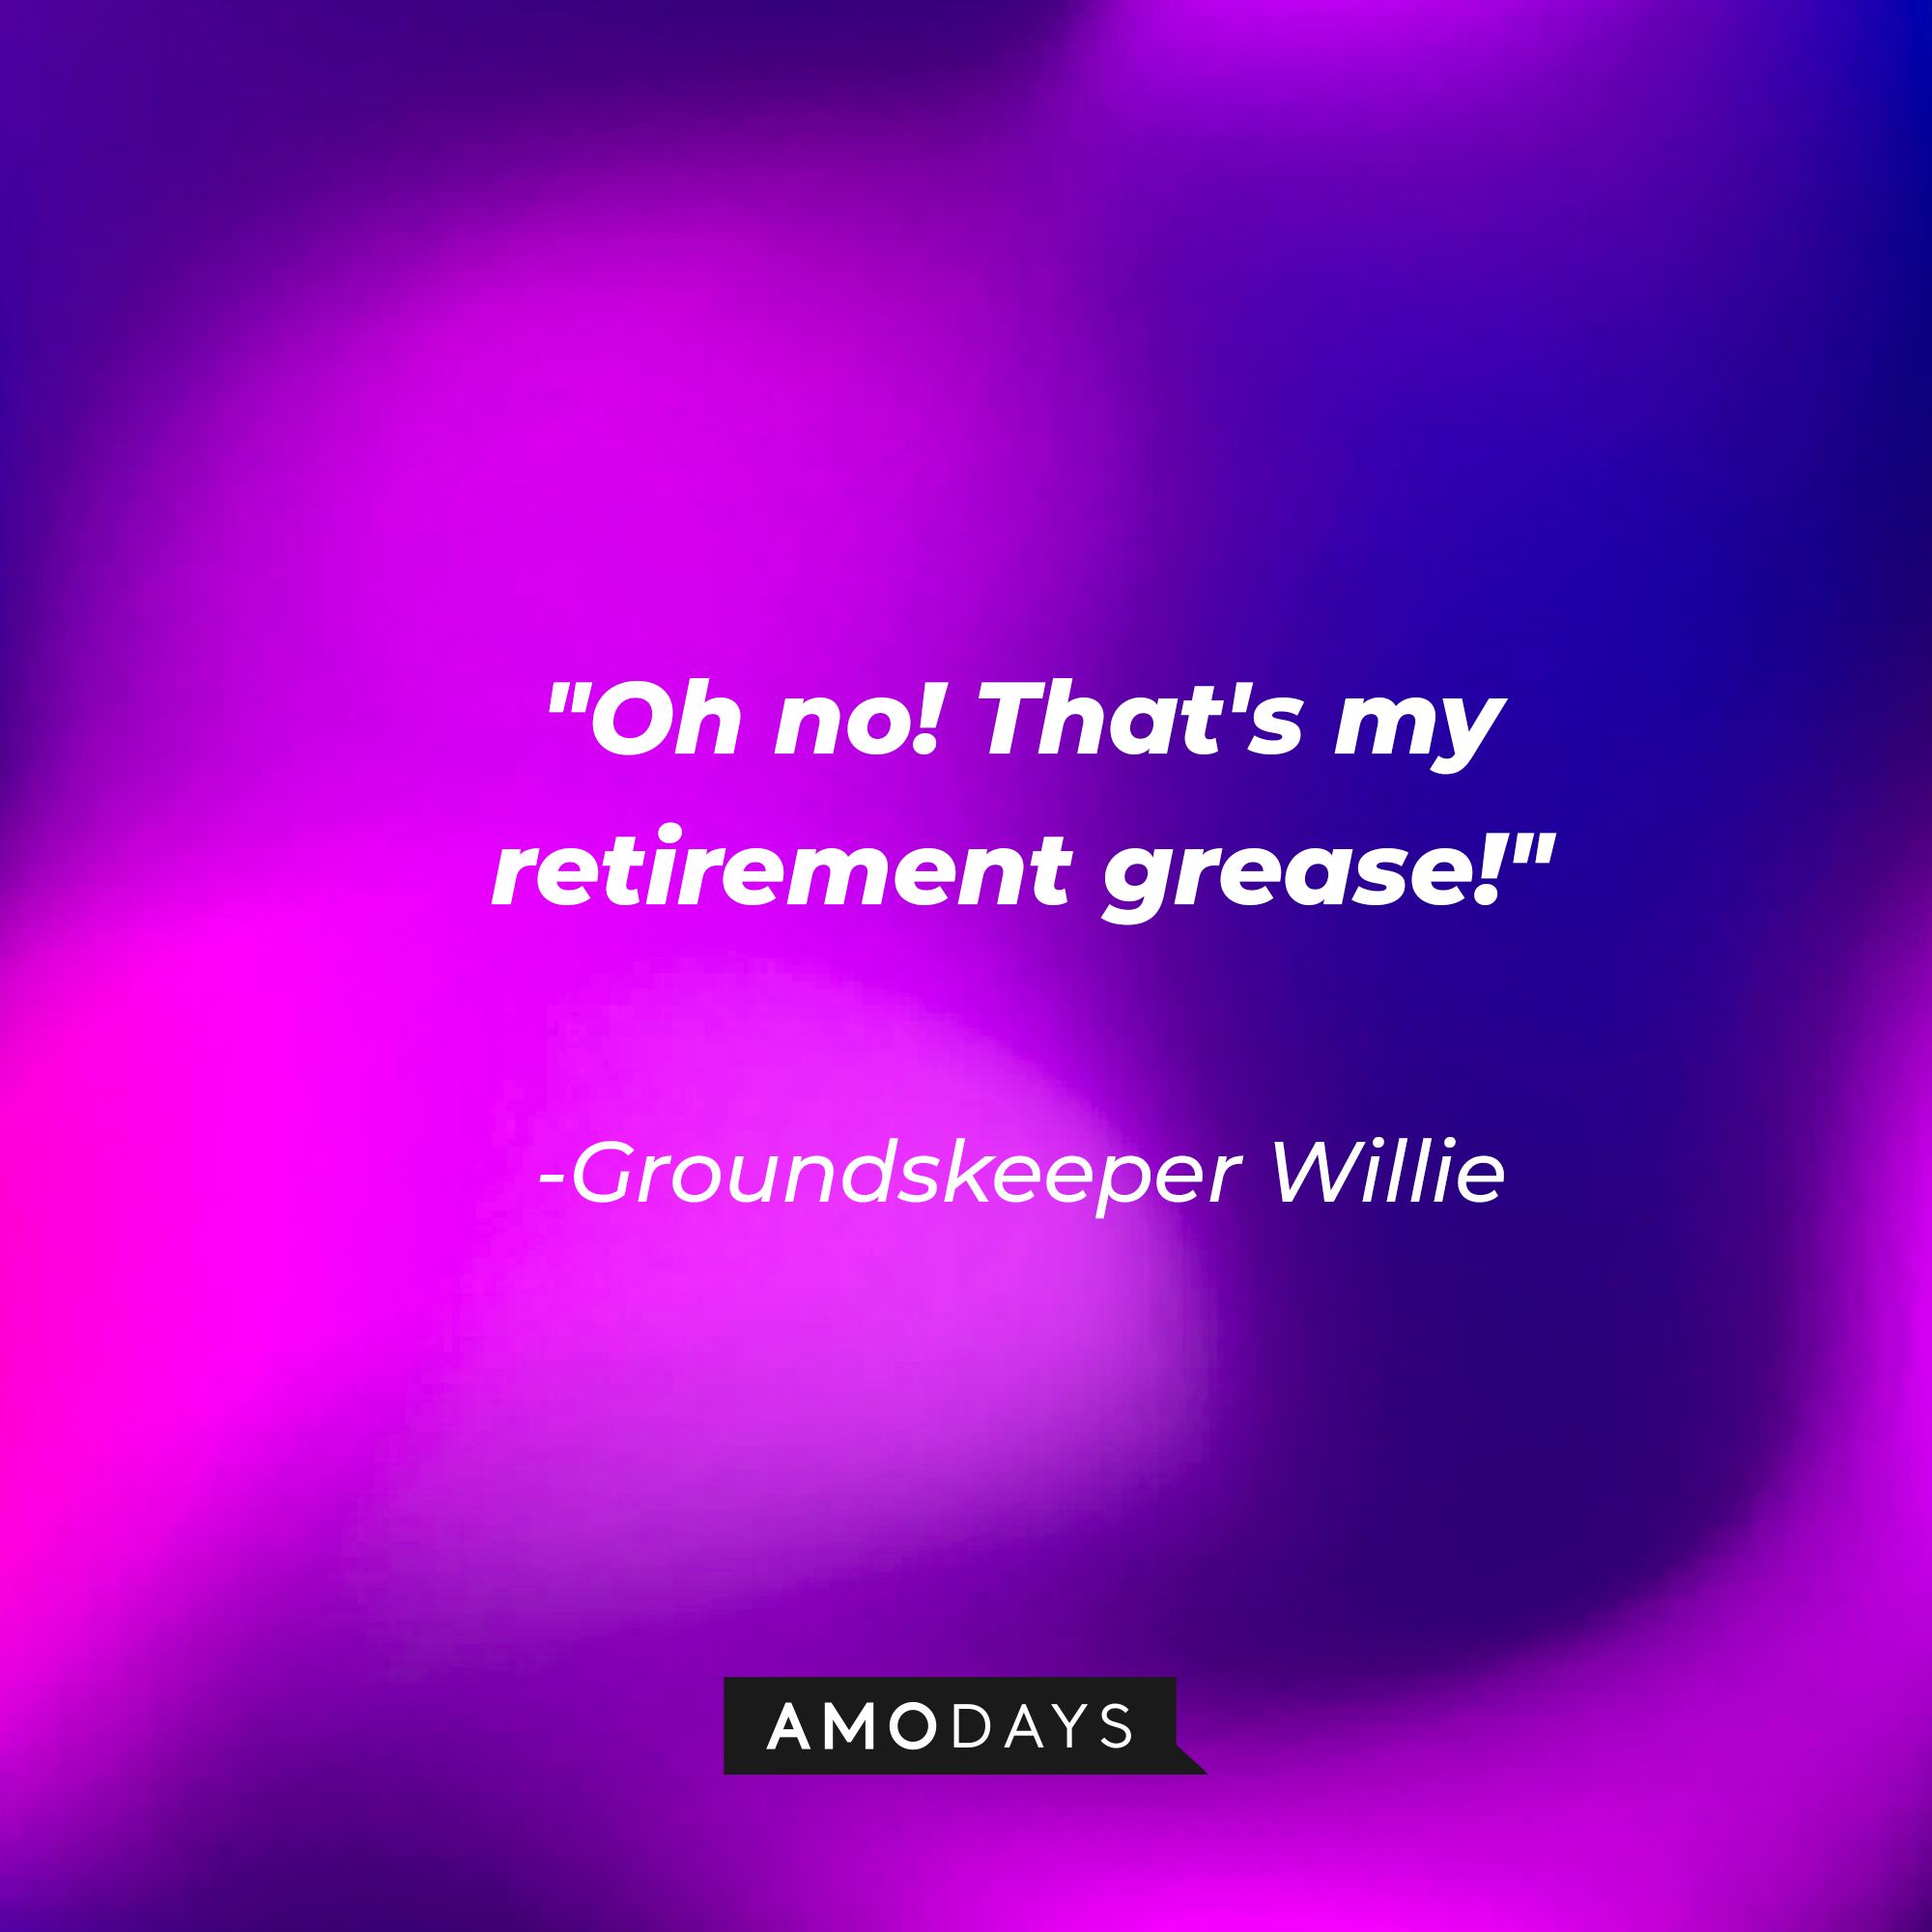 Groundskeeper Willie's quote: "Oh no! That's my retirement grease!" | Source: AmoDays